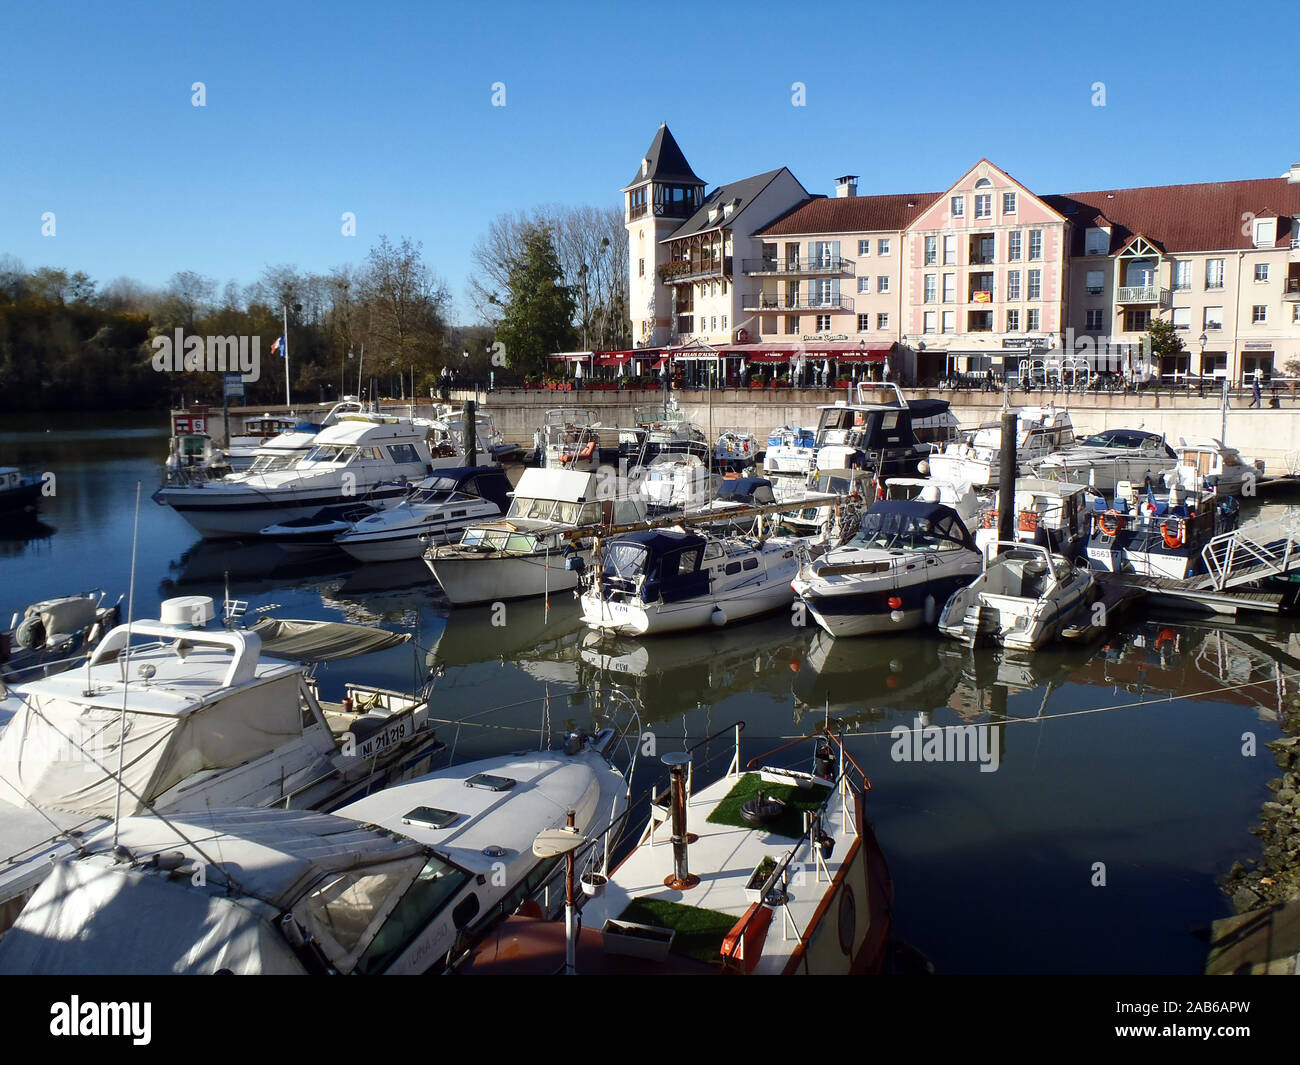 Cergy, France on December 2, 2012: Port Cergy is a marina on the River  Oise. The site comprises both housing and recreational yachtsl. The  northern pa Stock Photo - Alamy